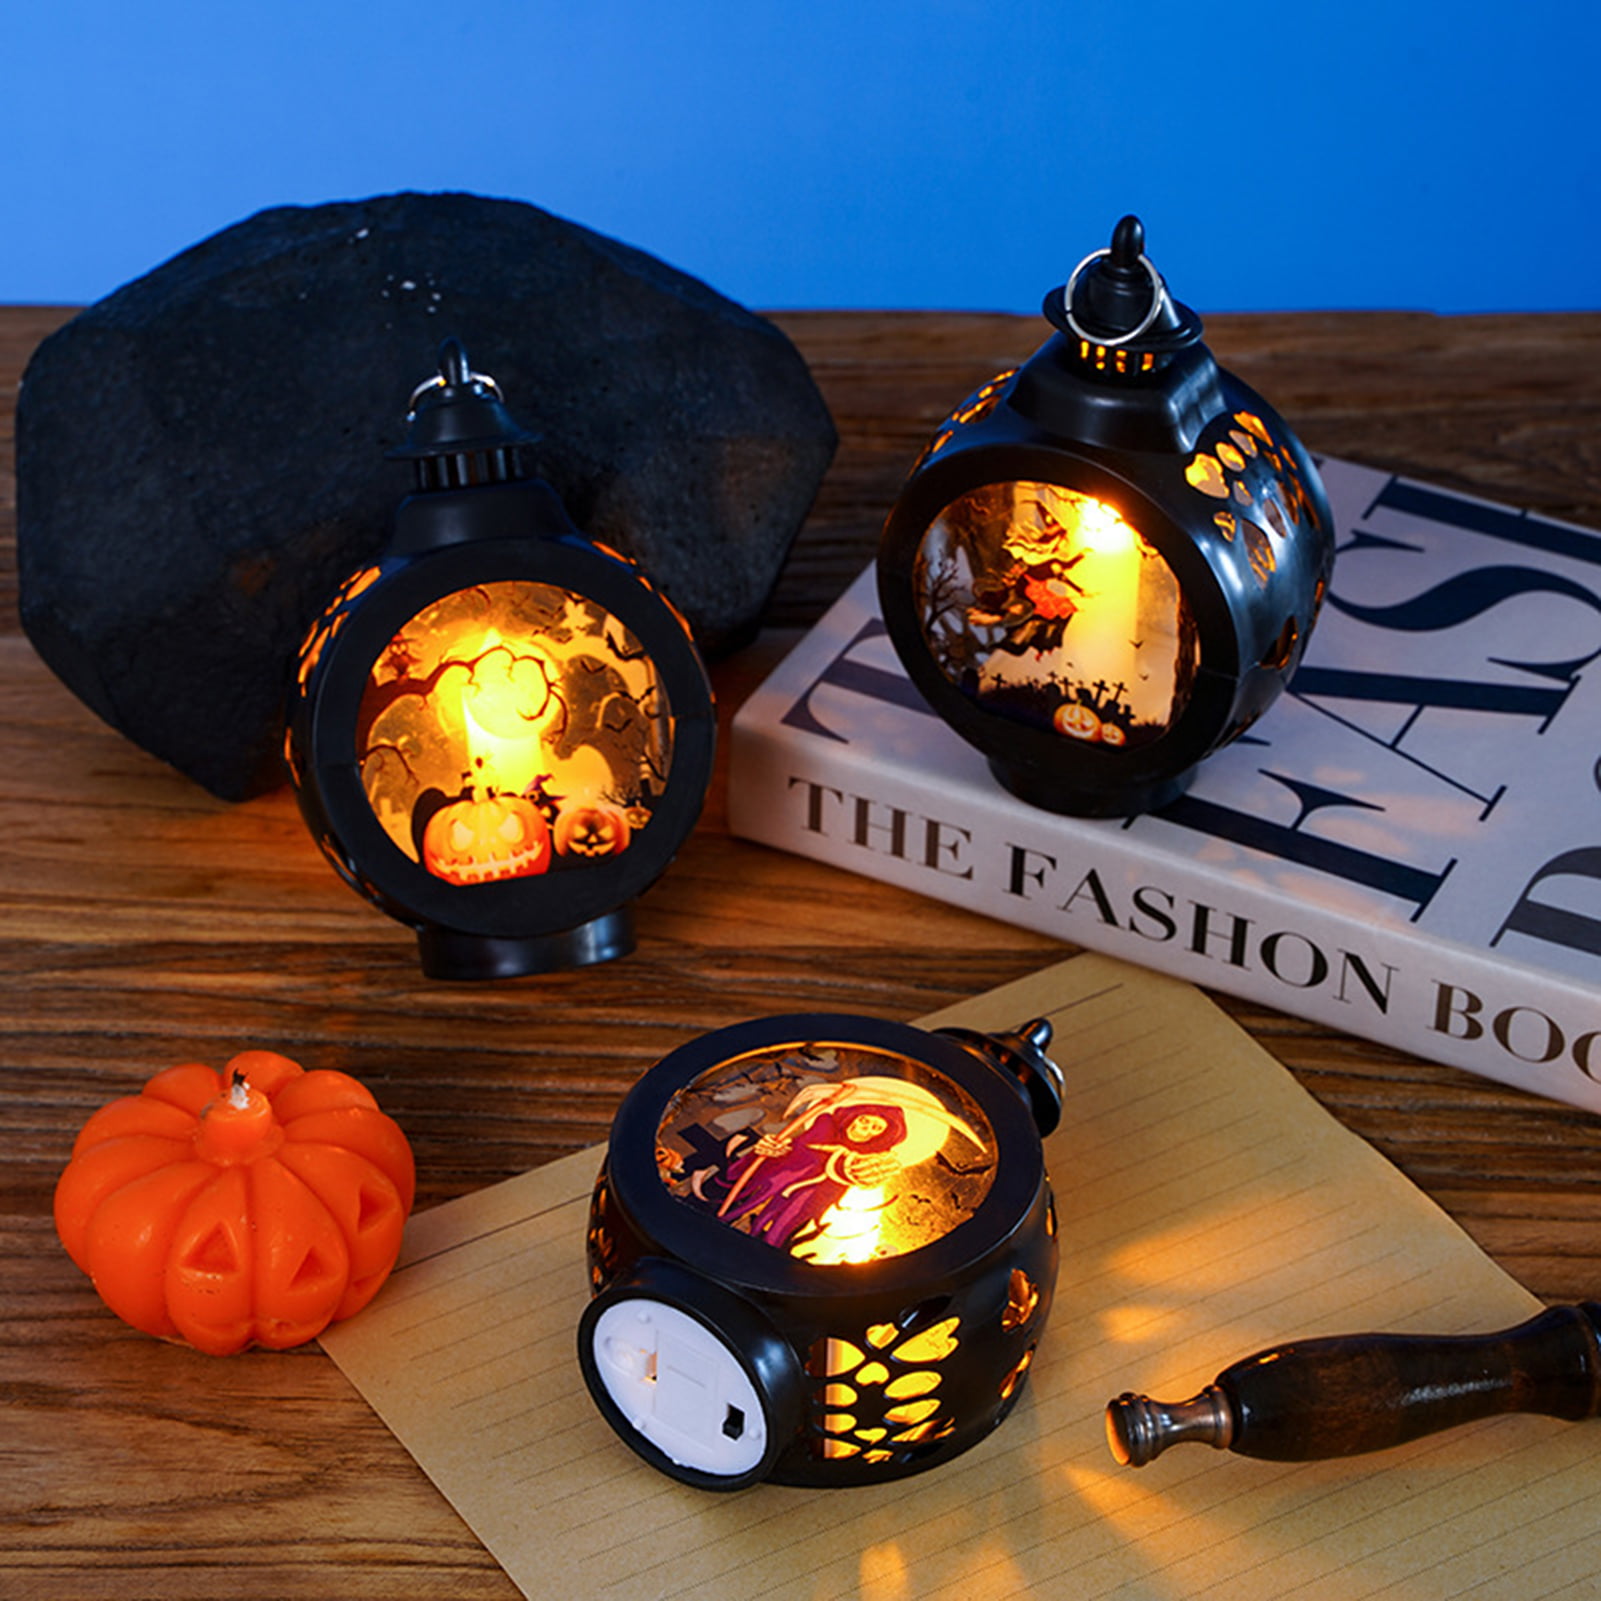 LLQ 8 Pcs Mini Lantern with Flickering LED Tea Light, Battery Included,  Vintage Brown Lanterns Decorative, Hanging Candle Lanterns for Halloween